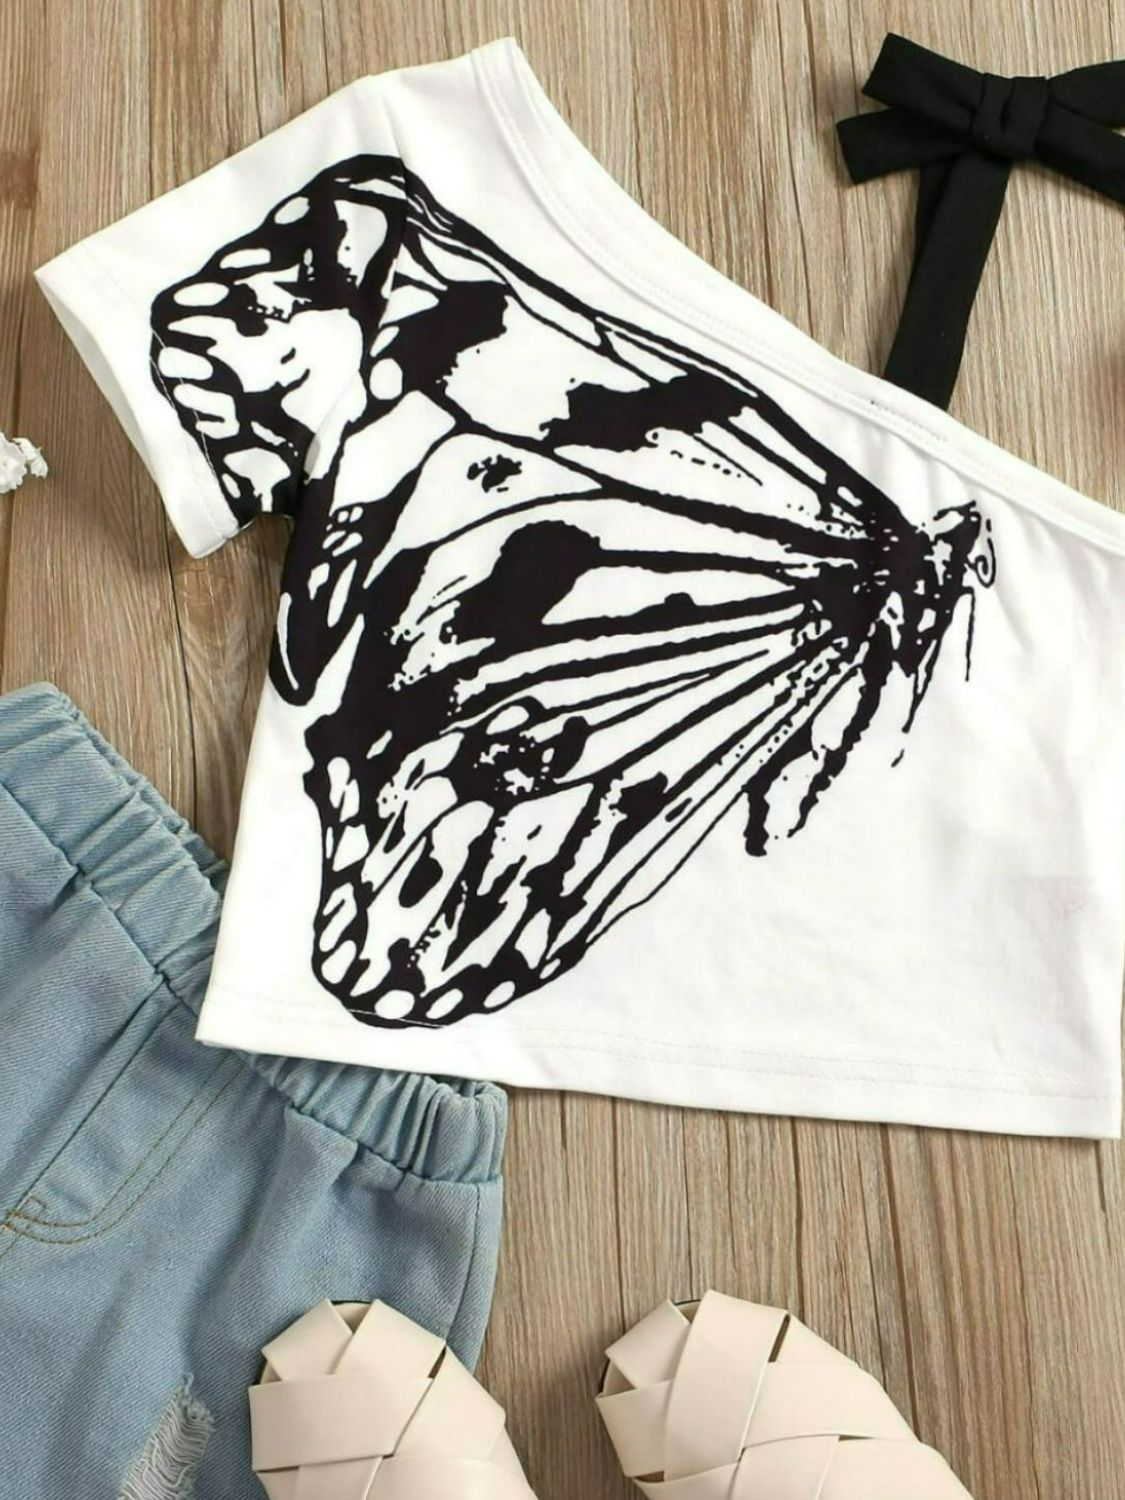 Girls Butterfly Graphic Asymmetrical Neck T-Shirt 1y-6y - Fashion Girl Online Store